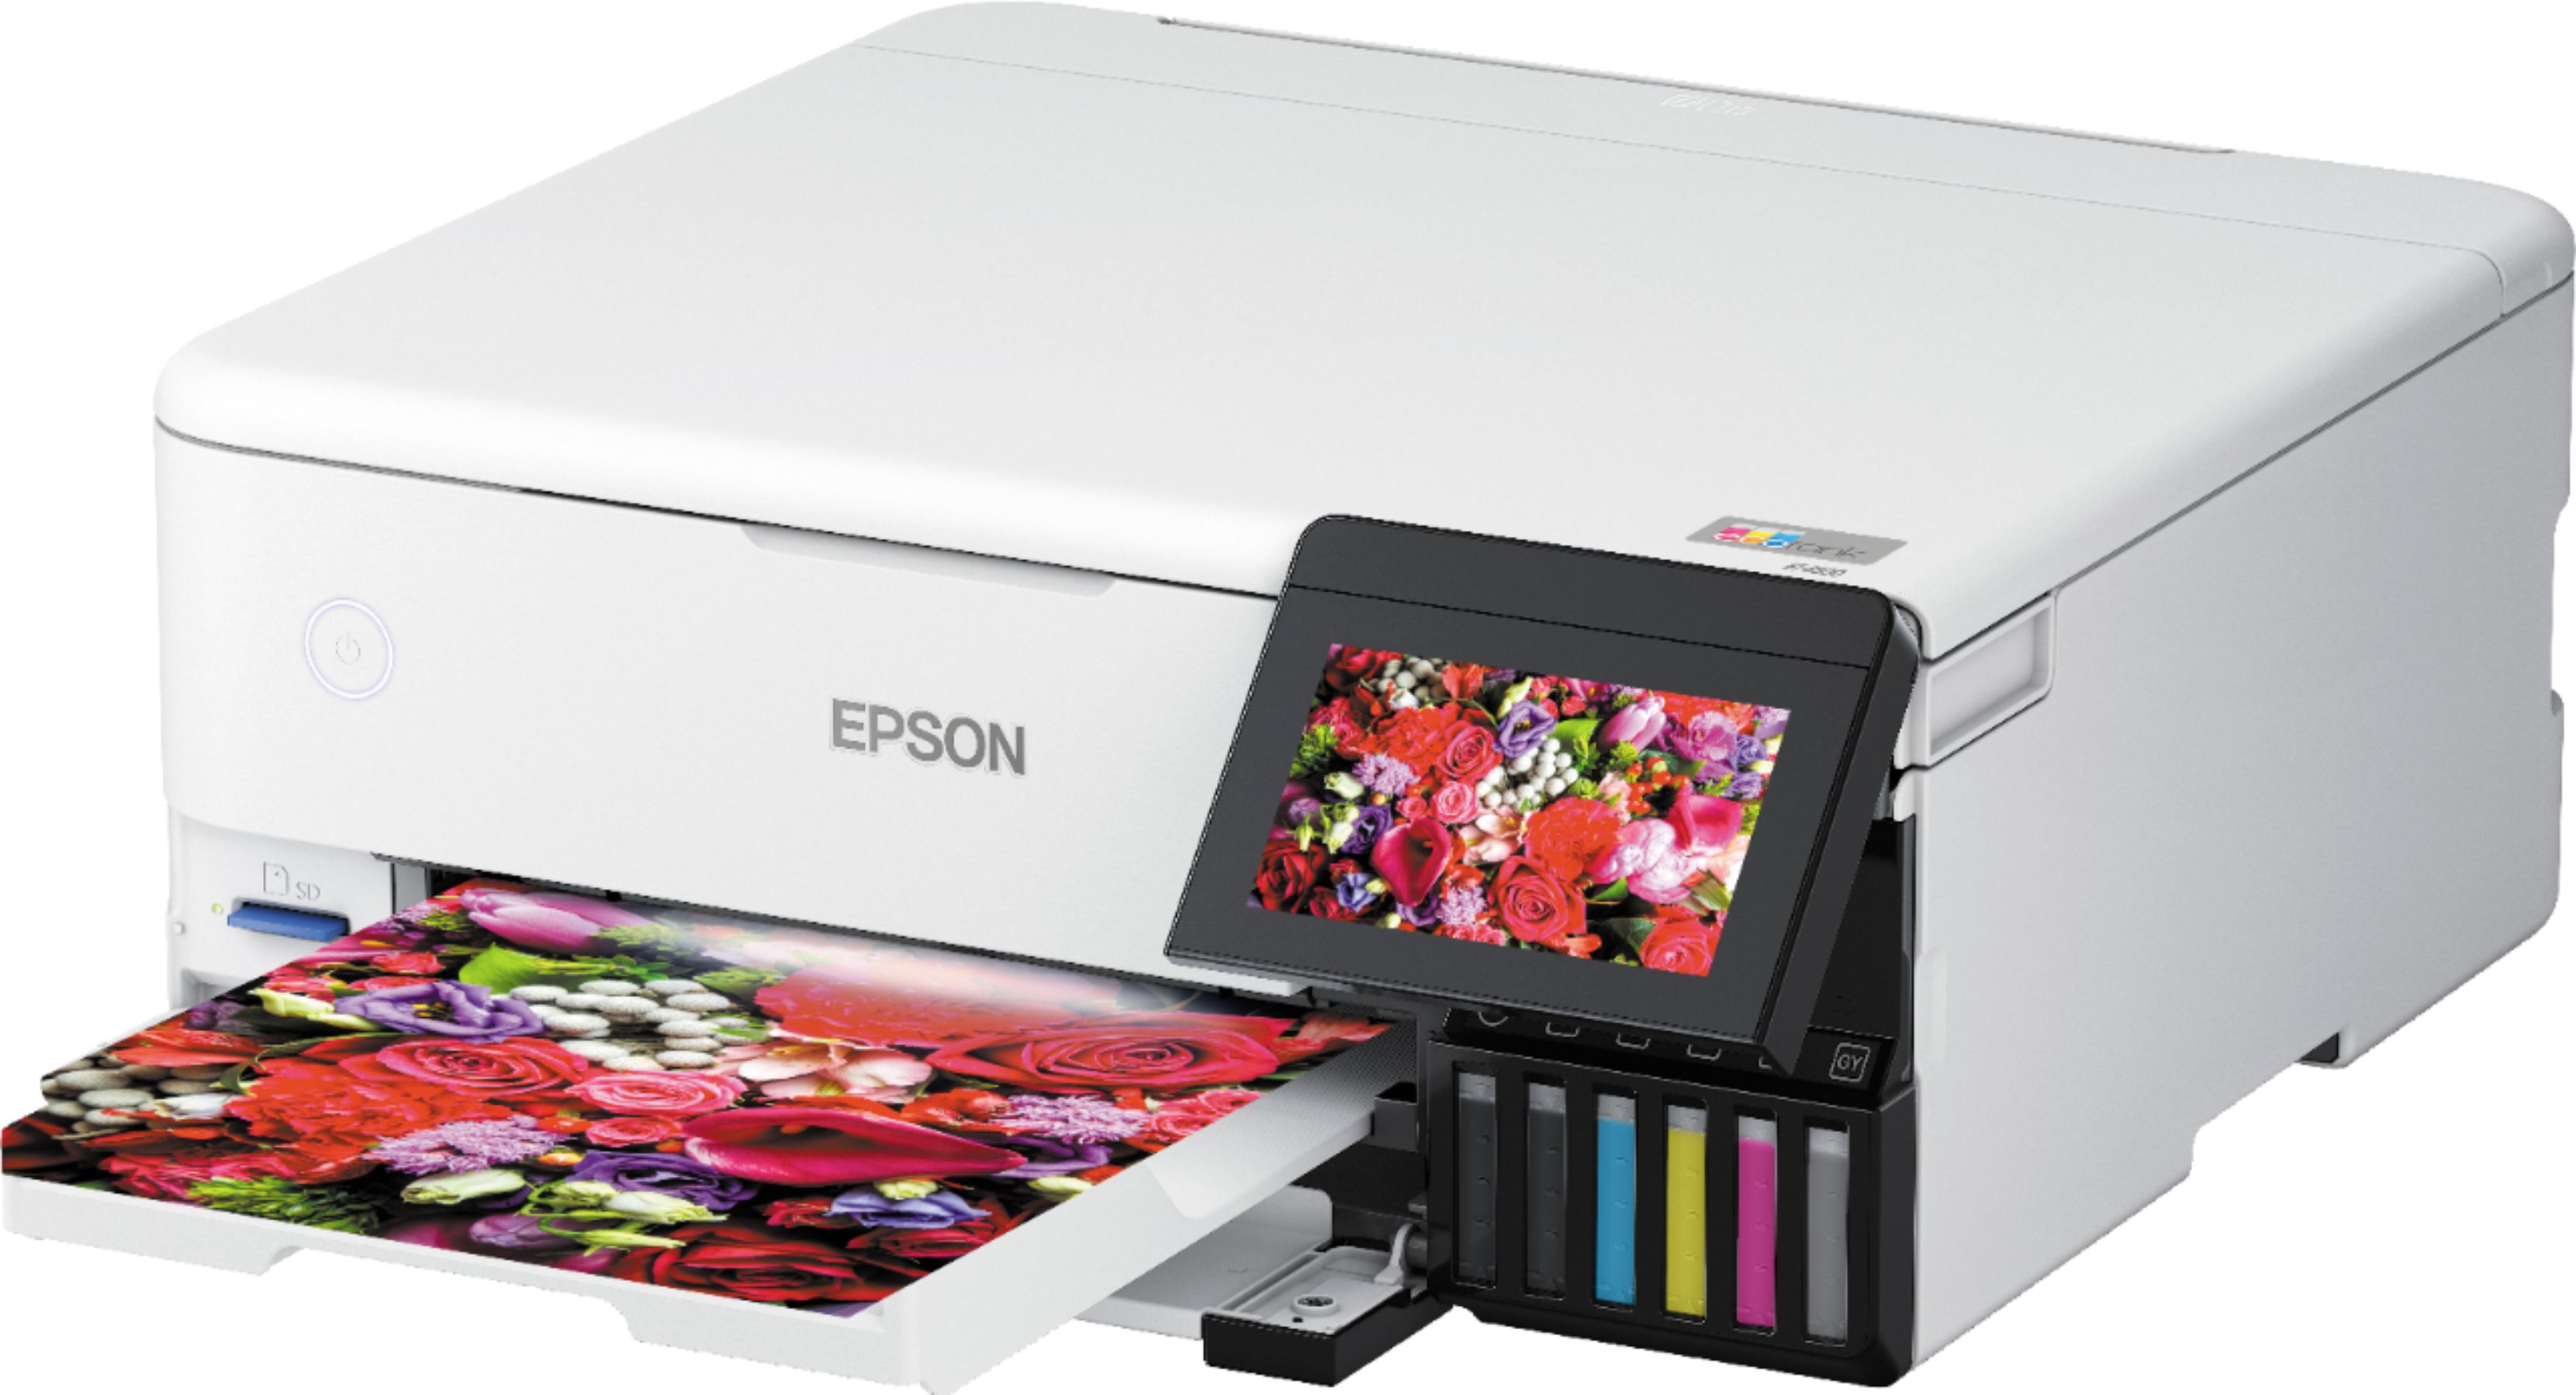 Epson EcoTank Photo ET-8500 Wireless Color All-in-One Supertank